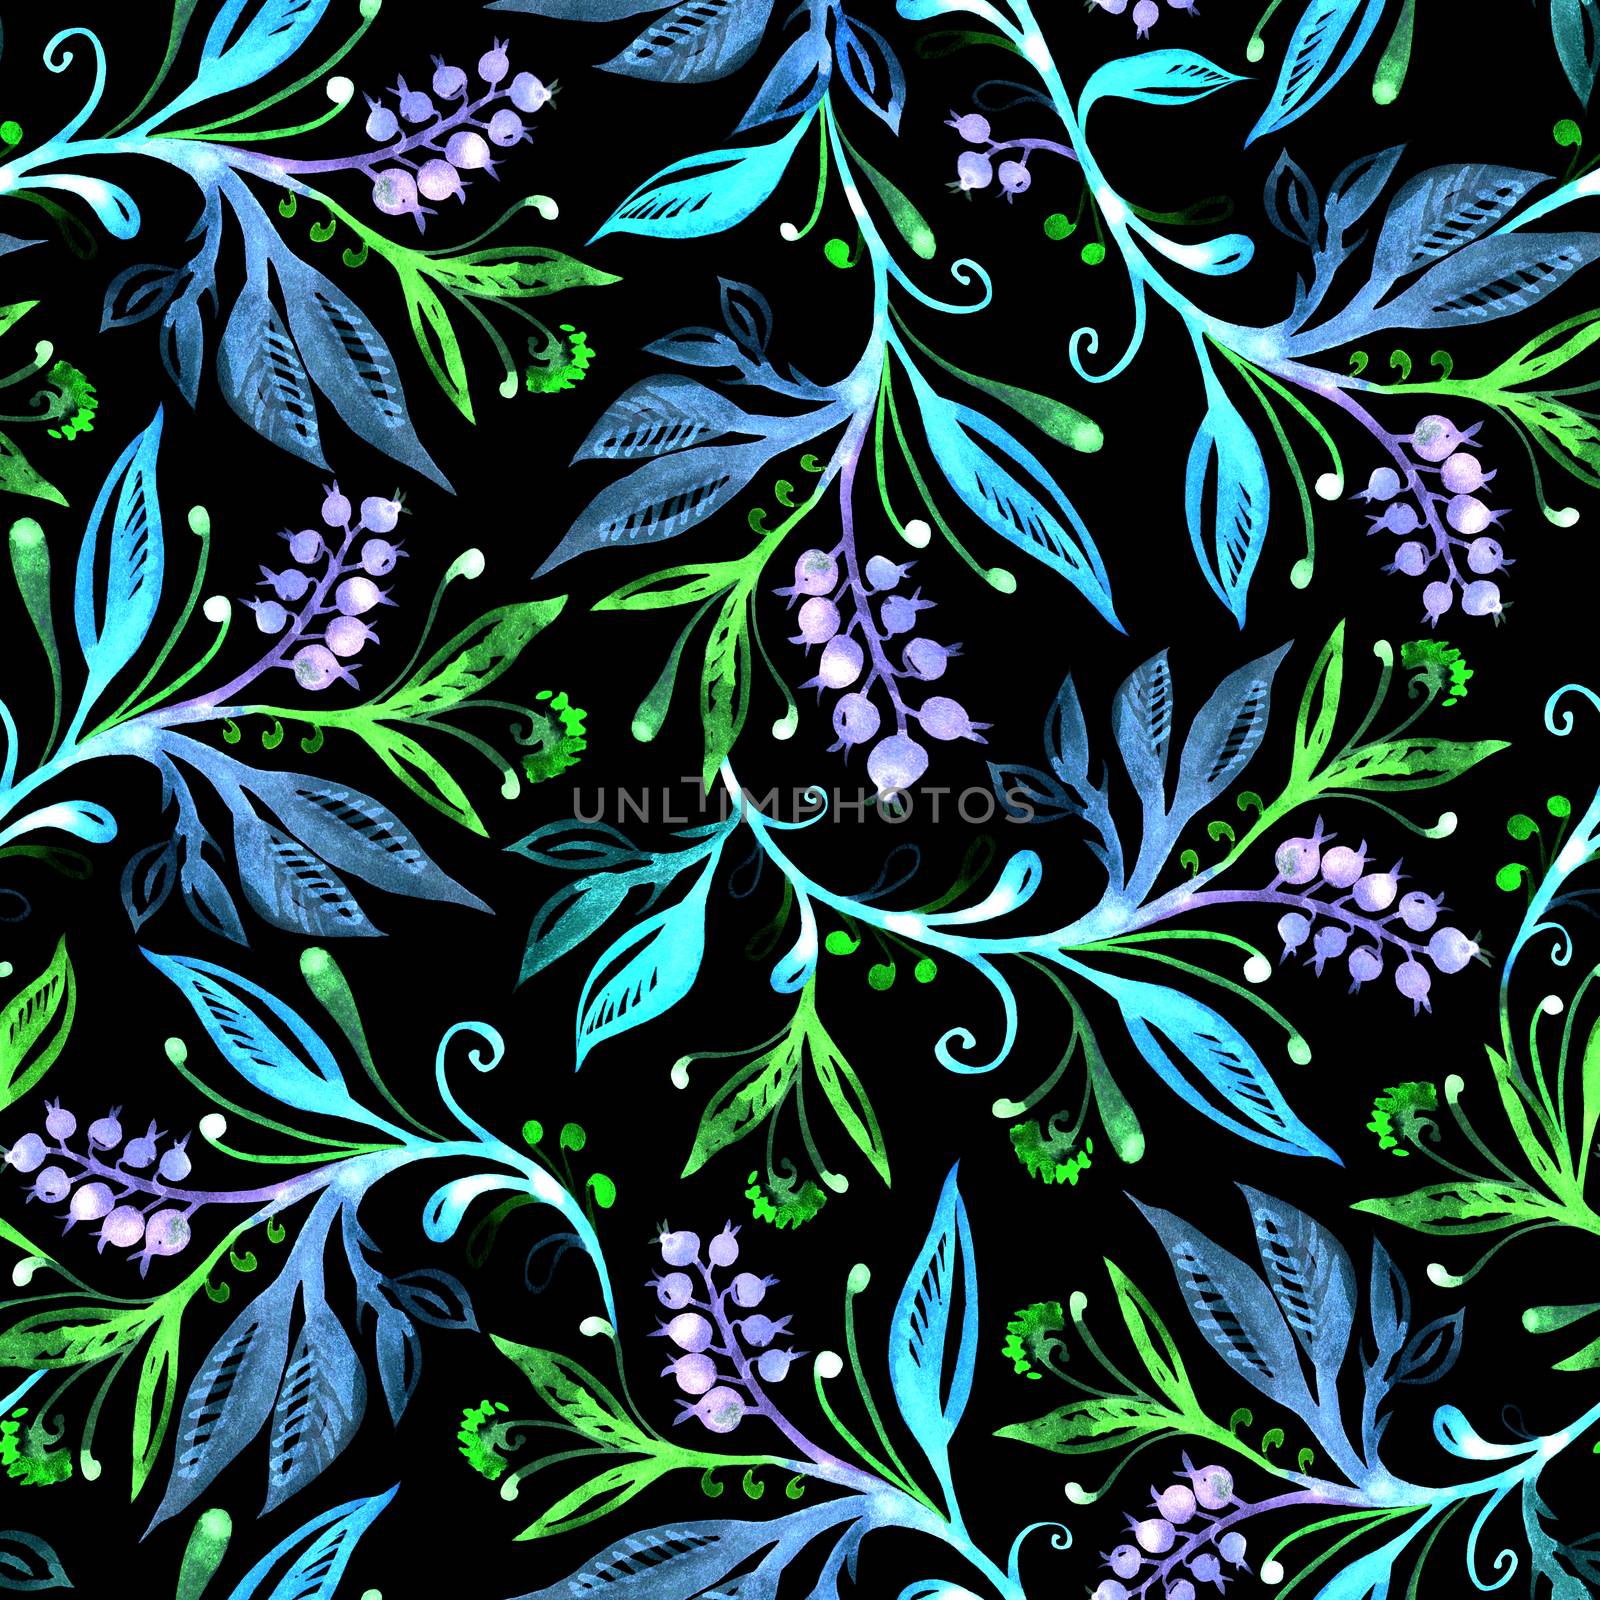 Floral seamless pattern with leaves and berries on a black background. Hand drawing and digitized. Design for wallpaper, textile, fabric, bookend, wrapping.